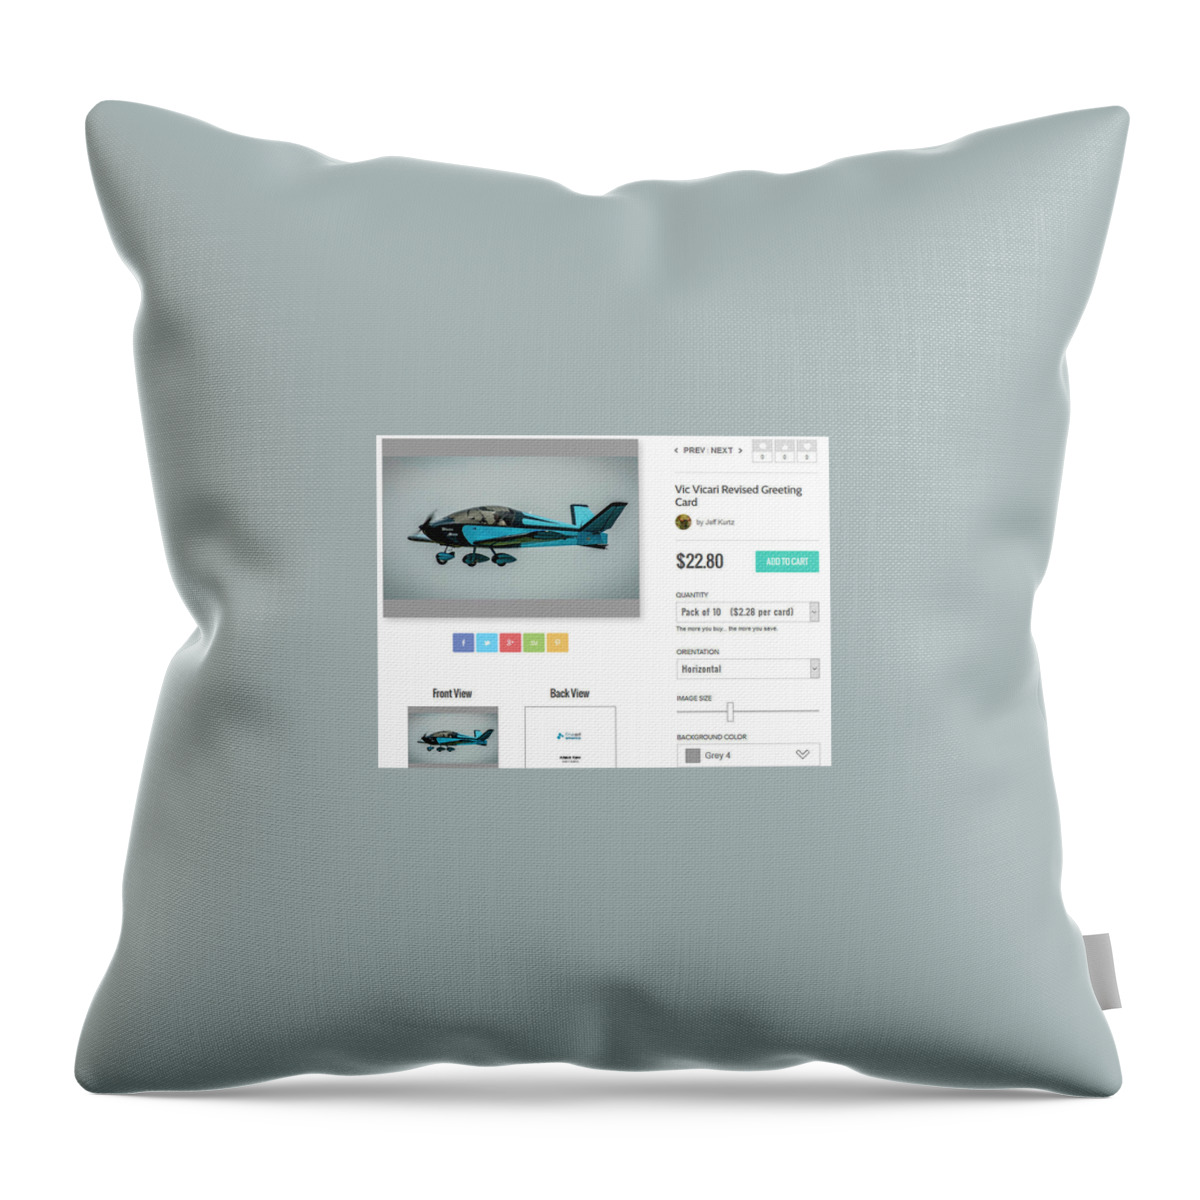 Greeting Card Sample Throw Pillow featuring the photograph Greeting cards - $22.80/10 by Jeff Kurtz